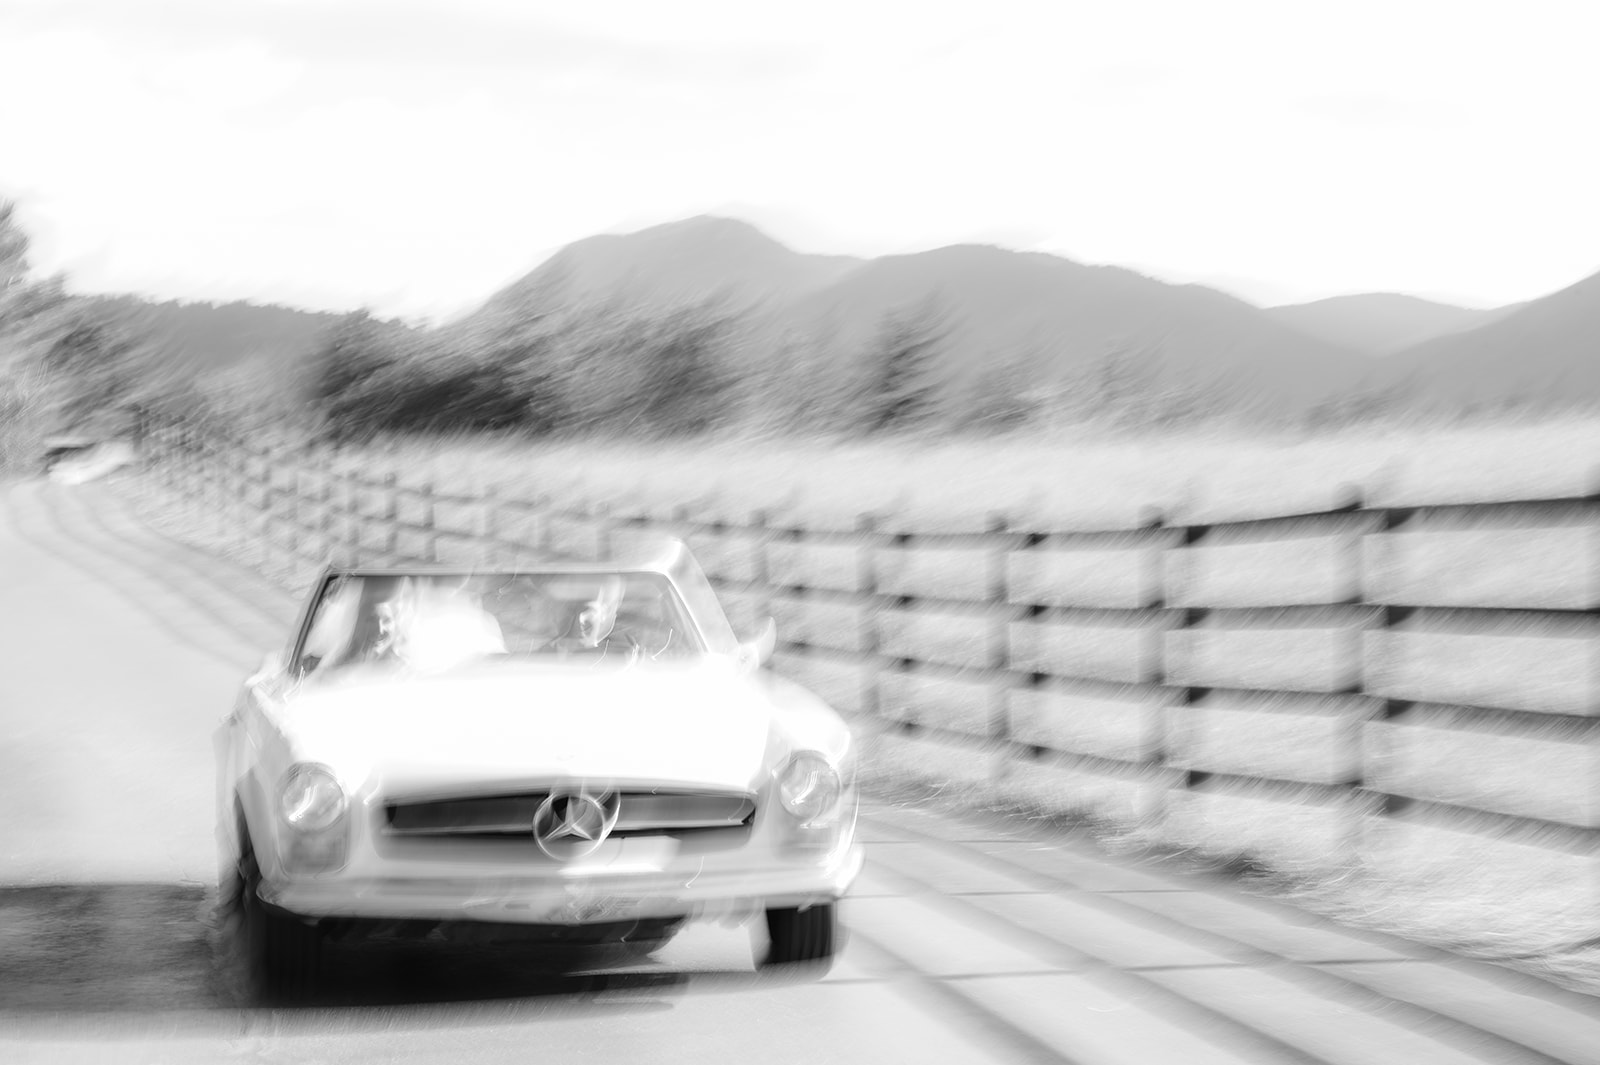 Couple in their vintage Mercedes Bez driving on wedding day at Spruce Mountain Ranch. 